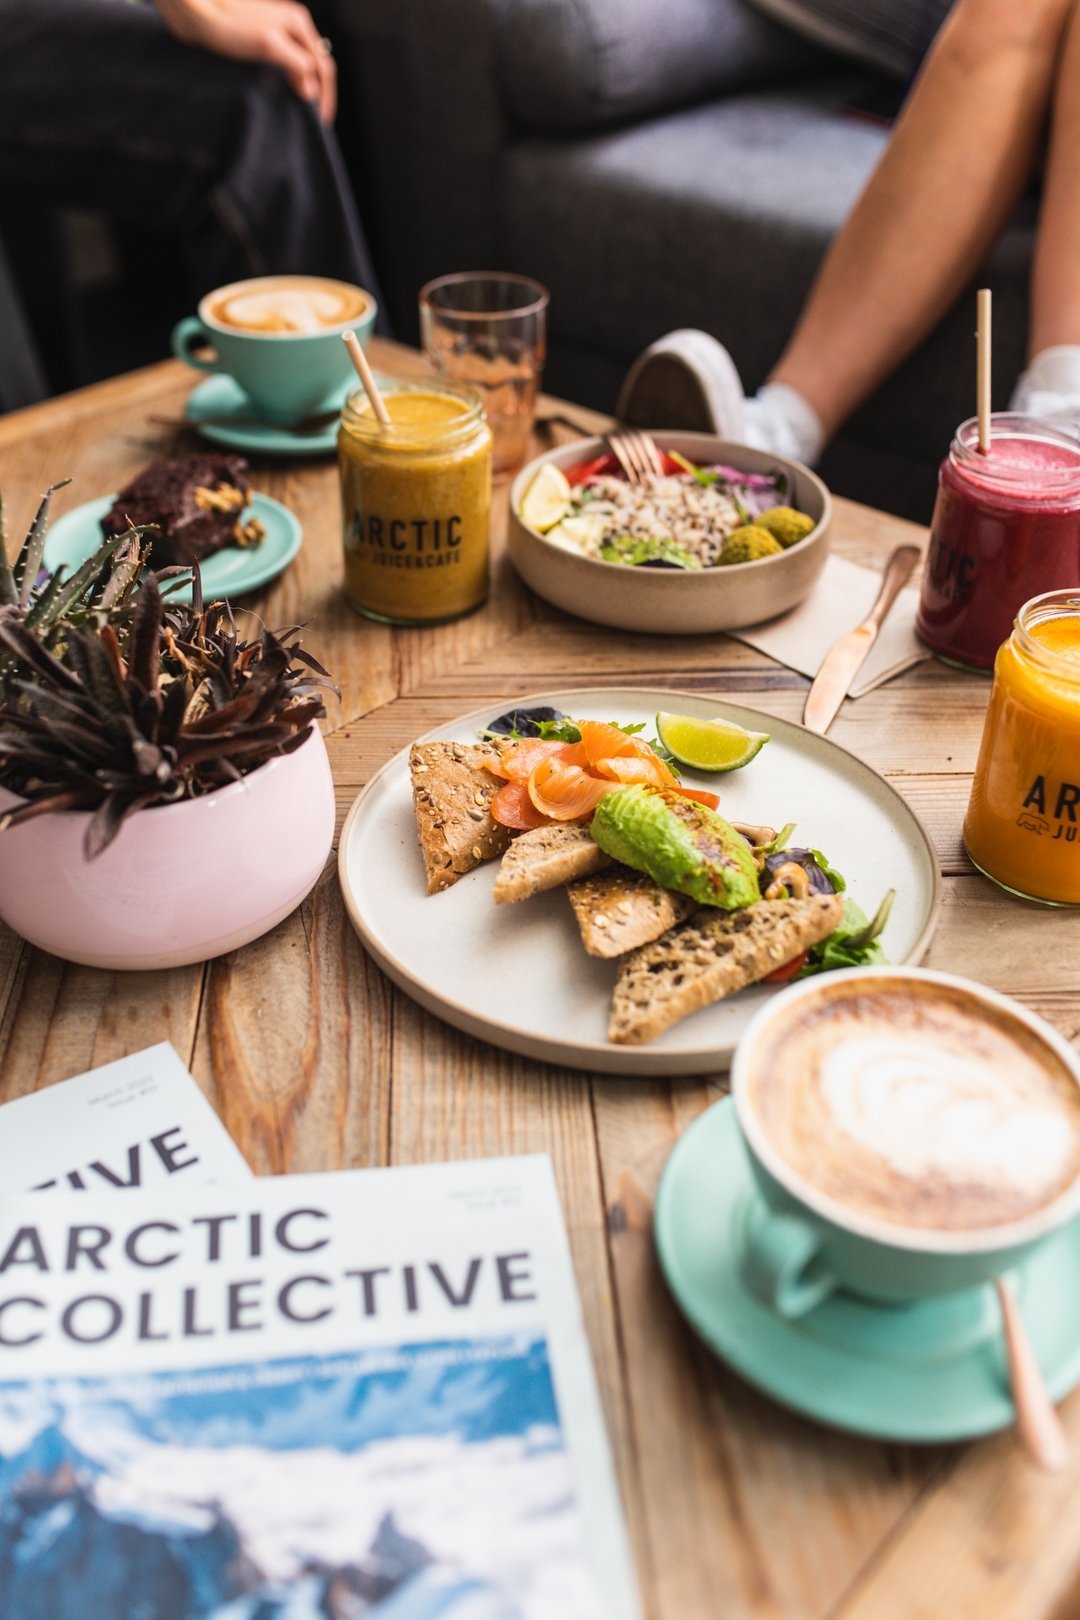 Life is beautiful, but it's even better with some AJC energy pre or post workout! 🌞✨ Indulge in our irresistible wild Avo Salmon while sipping on your favourite skinny or power juice. Get ready for a proper clean brunch this weekend! 🥑 #ArcticJuice